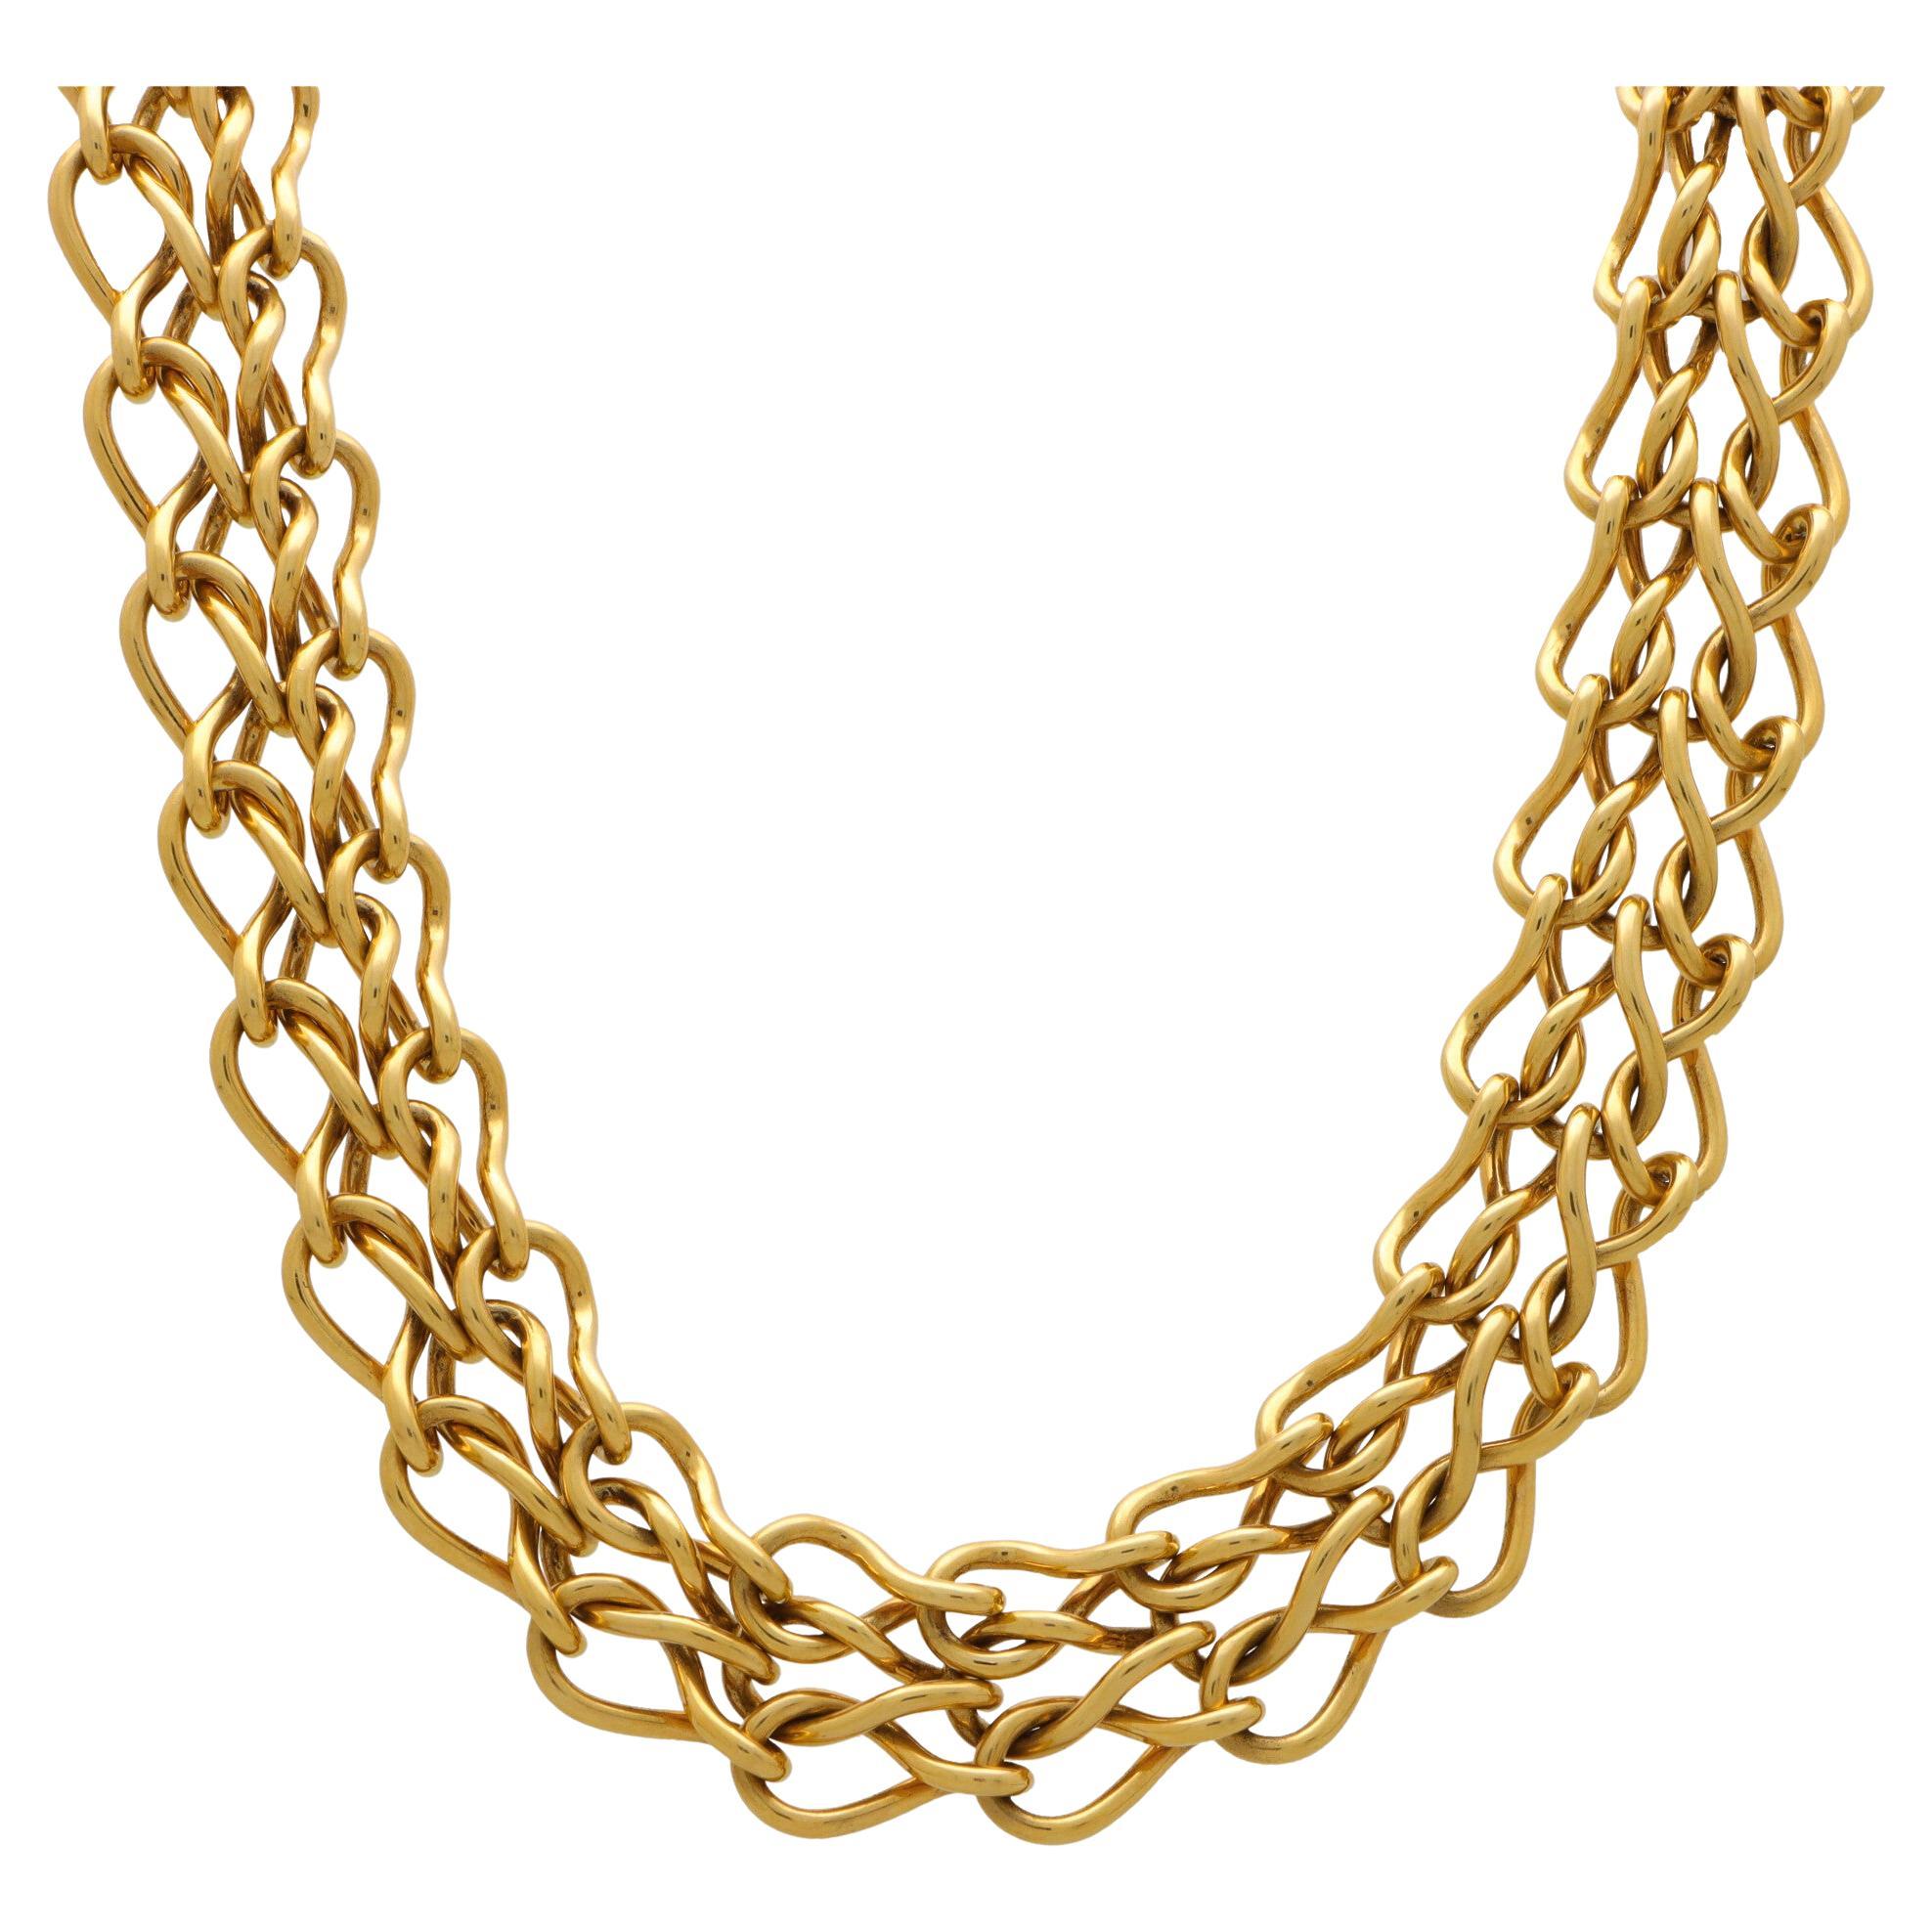 Vintage Cartier Double Twisted Chain Link Necklace Set in 18k Yellow Gold For Sale